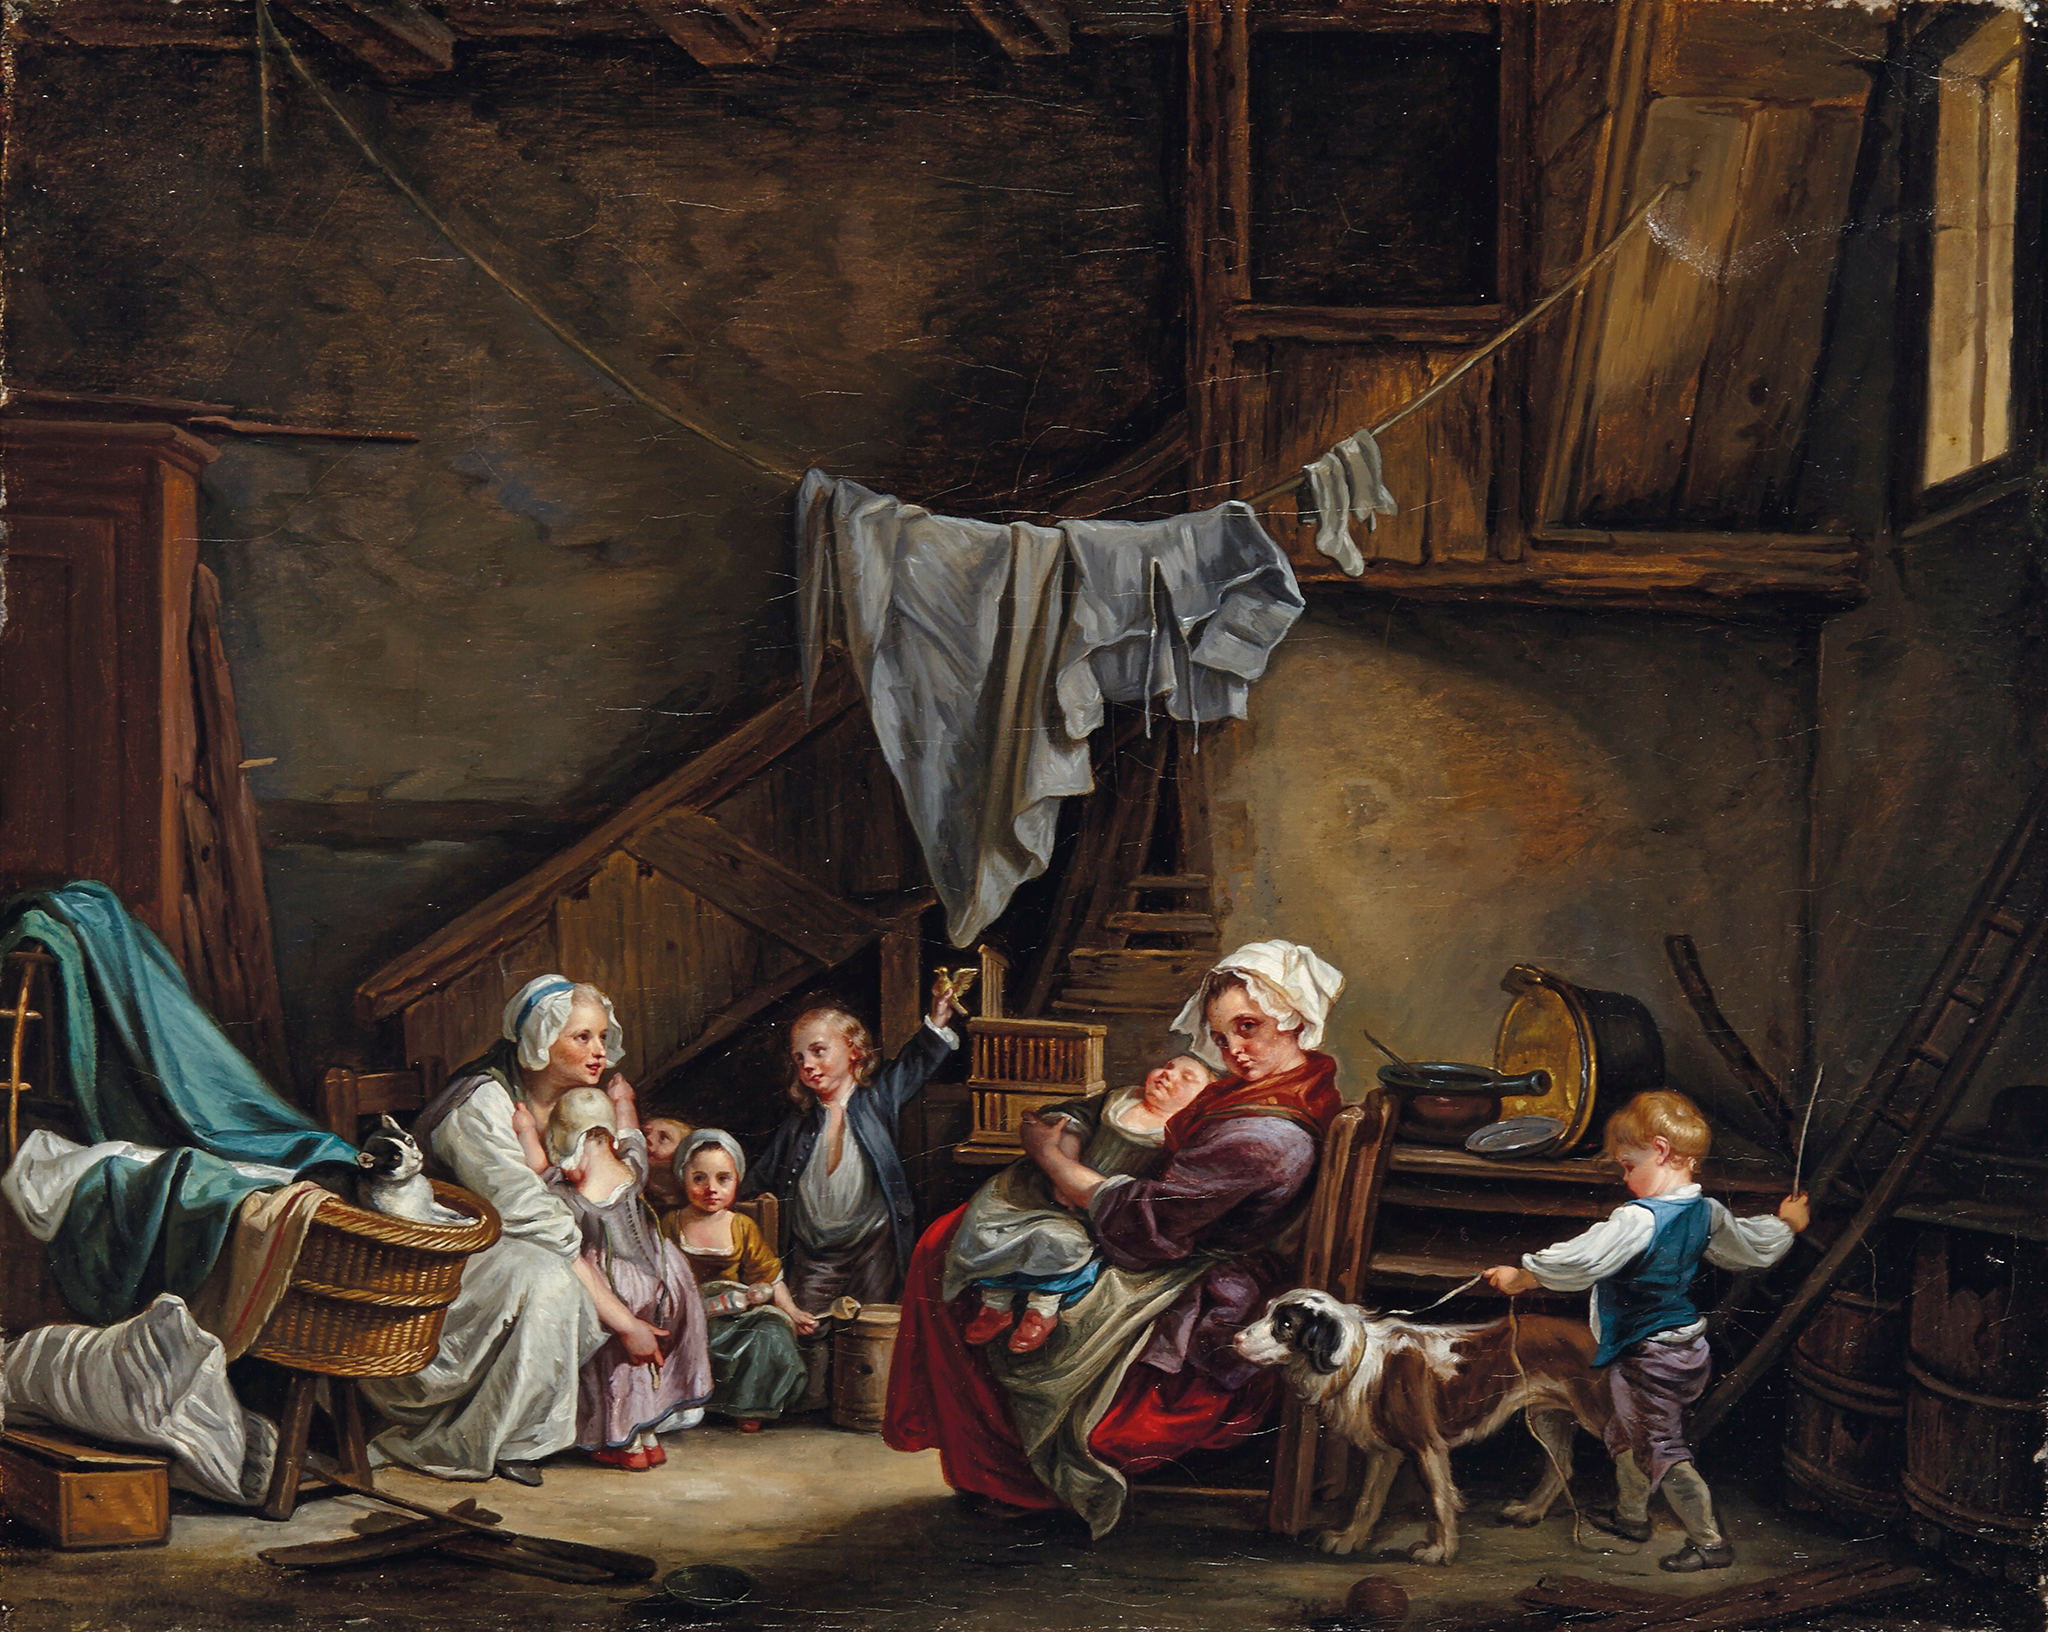 A painting depicting a room with women sitting and tending to the needs of the many children present. One of the women sits on a chair and holds a young child on her lap with her arms wrapped them. Another woman sits near the rest of the children on a bench. A young child leans against her near a basket that has clothes and a cat in it.  A young boy stands holding a stick and a dog by its leash. Above them is a clothesline with fabrics attached. The background consists of an assortment of tools and objects on the tables and cabinets, along with a wooden staircase that leads to another room.